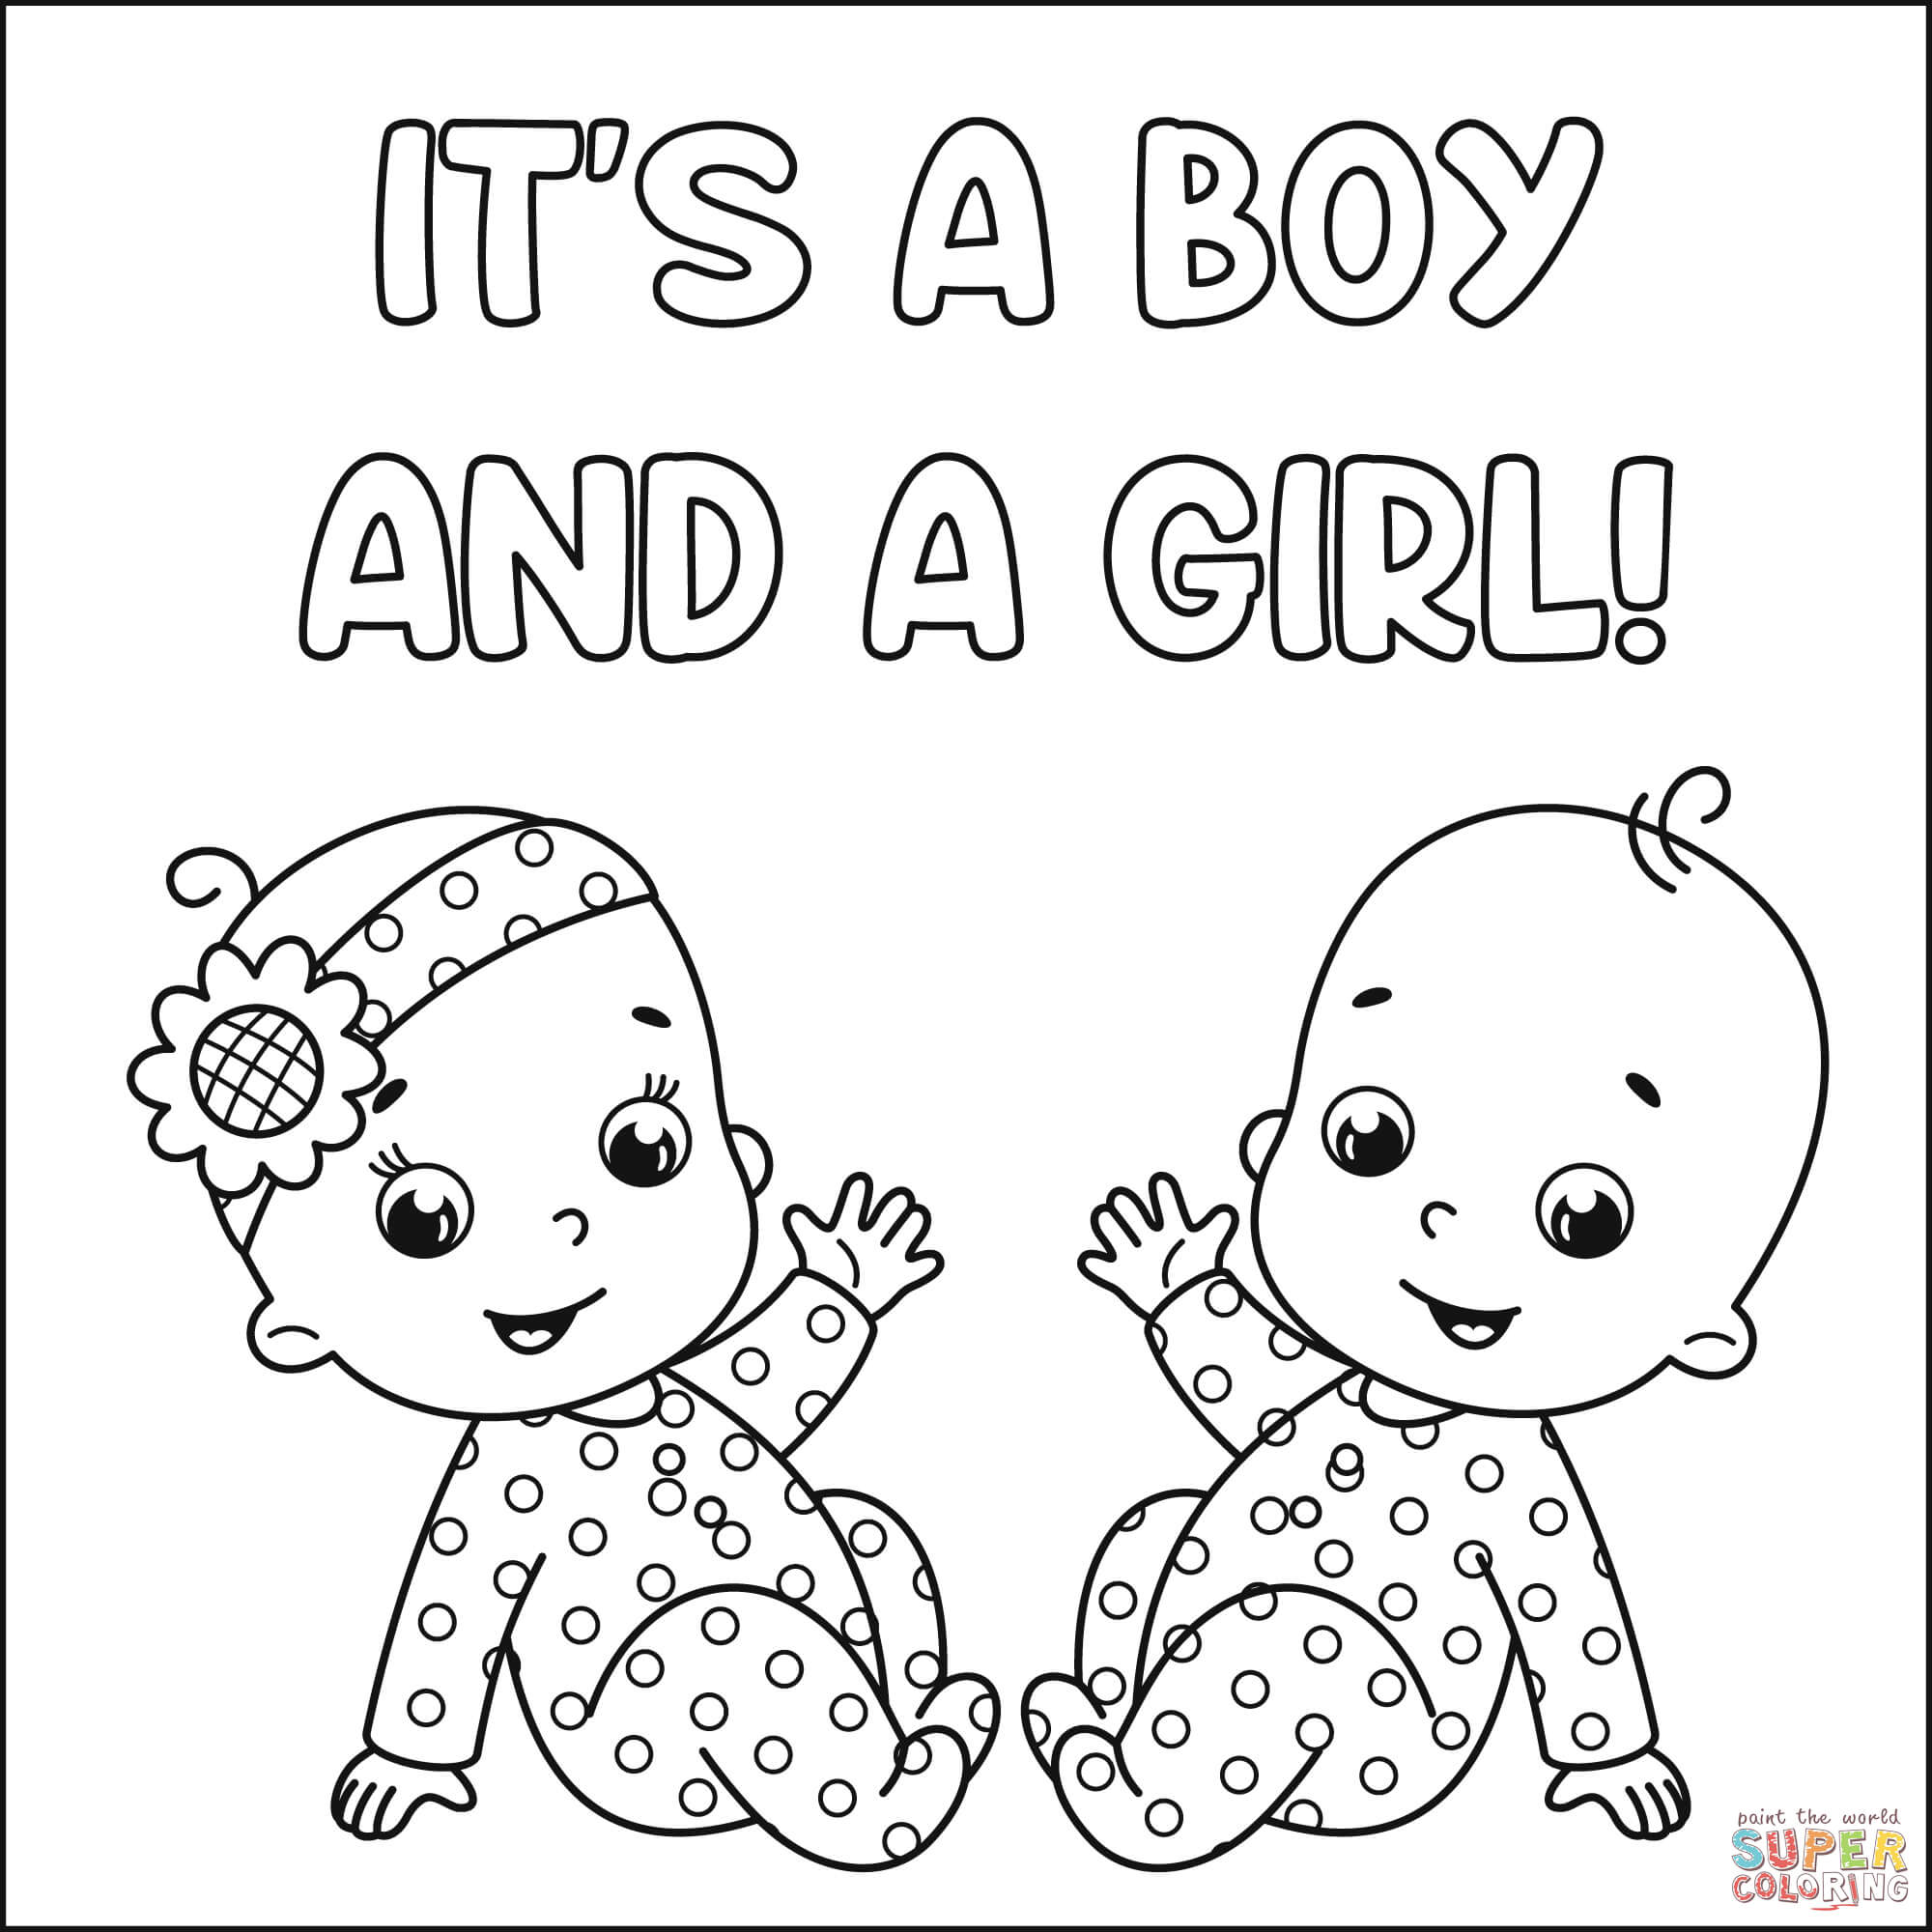 It's A Boy And A Girl Coloring Page   Free Printable Coloring ...